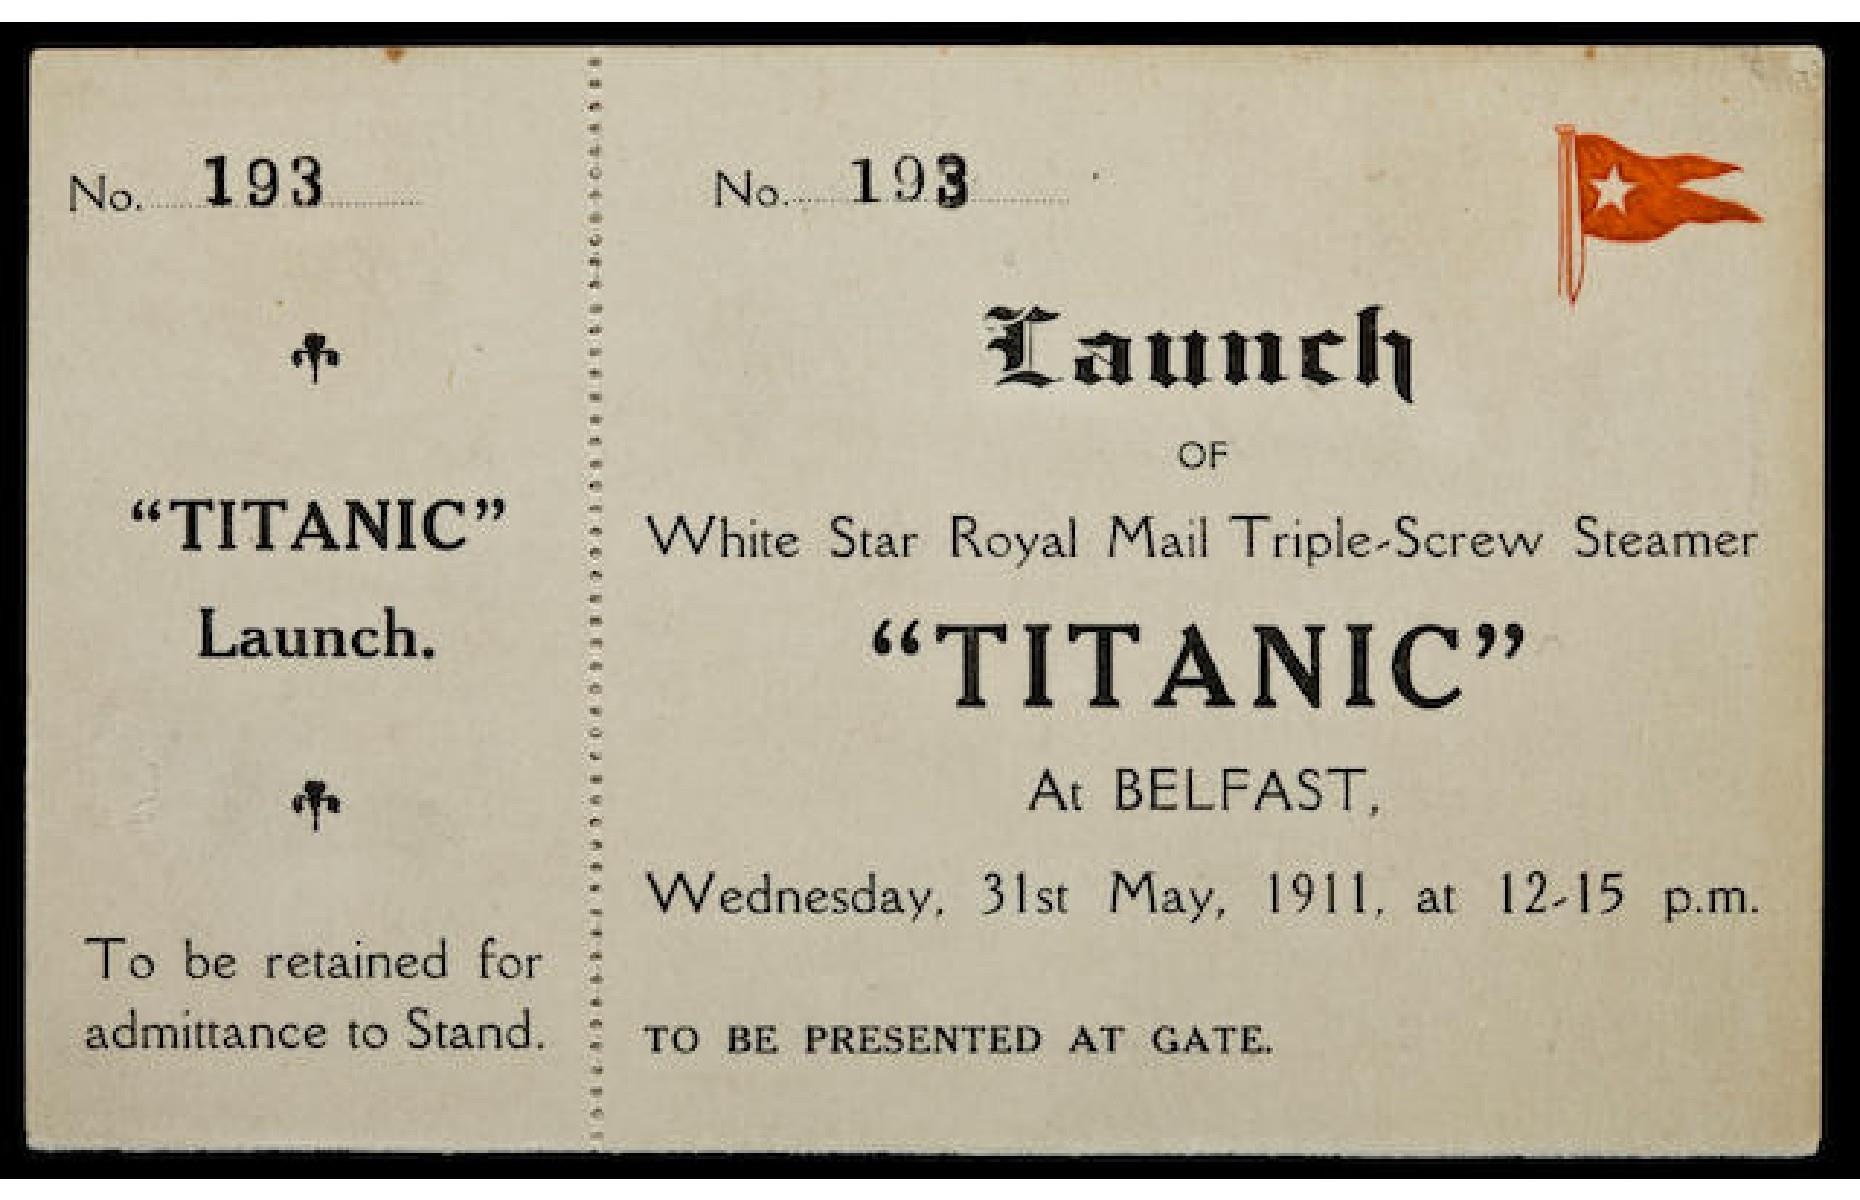 The Titanic’s launch from shipbuilding company Harland & Wolff in Belfast was set to be such an exciting event that tickets were sold to spectators keen to watch the ship slide into the sea for the very first time. This is the only fully intact, unused ticket known to still exist and as a result it sold for $56,250 at New York auction house Bonhams in 2012.